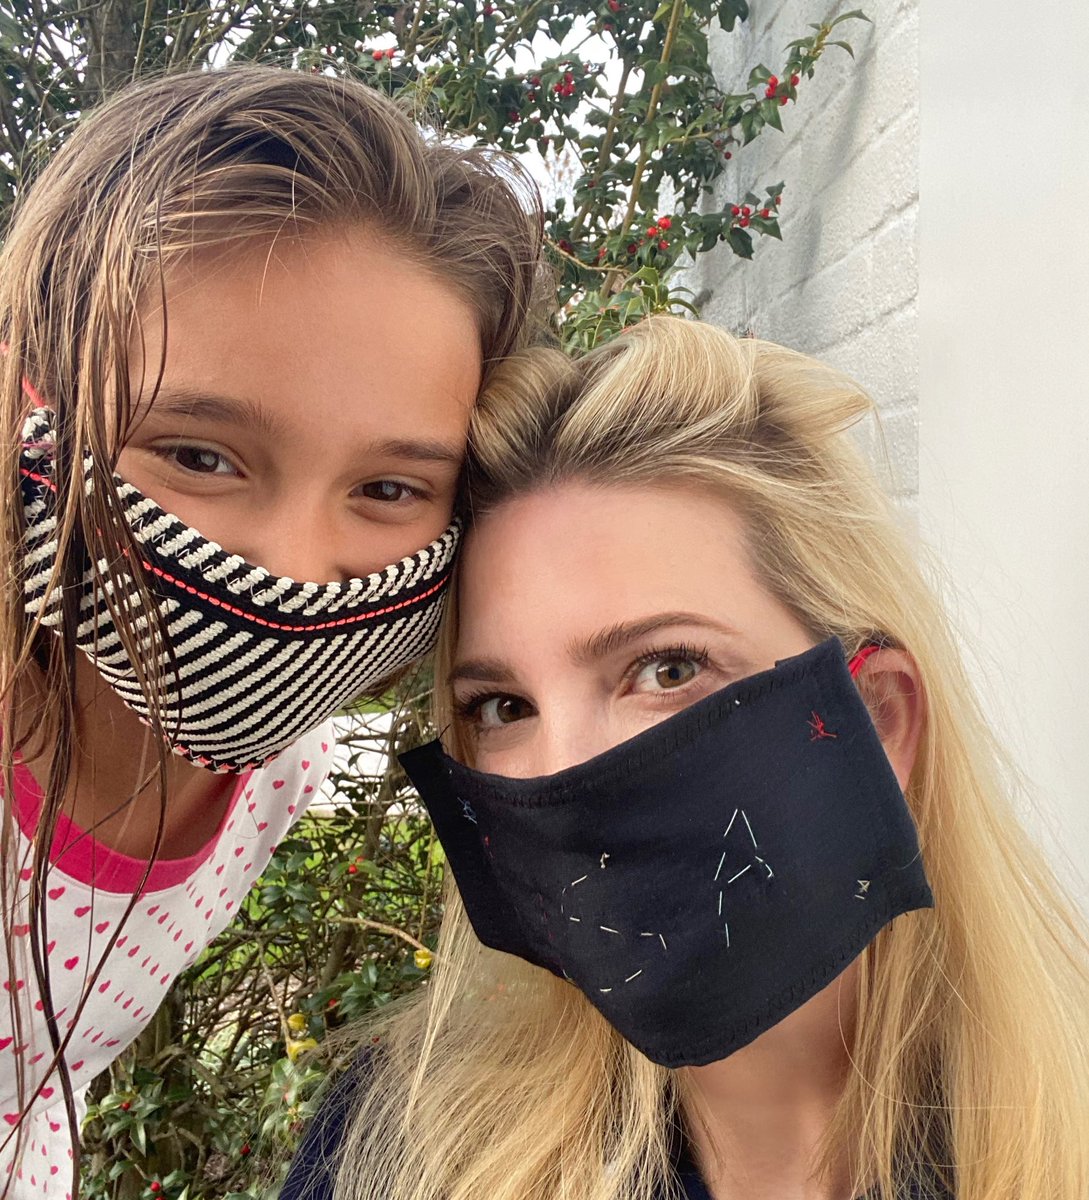 As we enter the new week, let’s keep each other safe by following  @CDCgov guidance to wear a mask or face covering when out in public.You can find instructions online on how to make your own mask. (I made Arabella’s and she made mine - yes, she stitched USA on it!!)  #COVID19